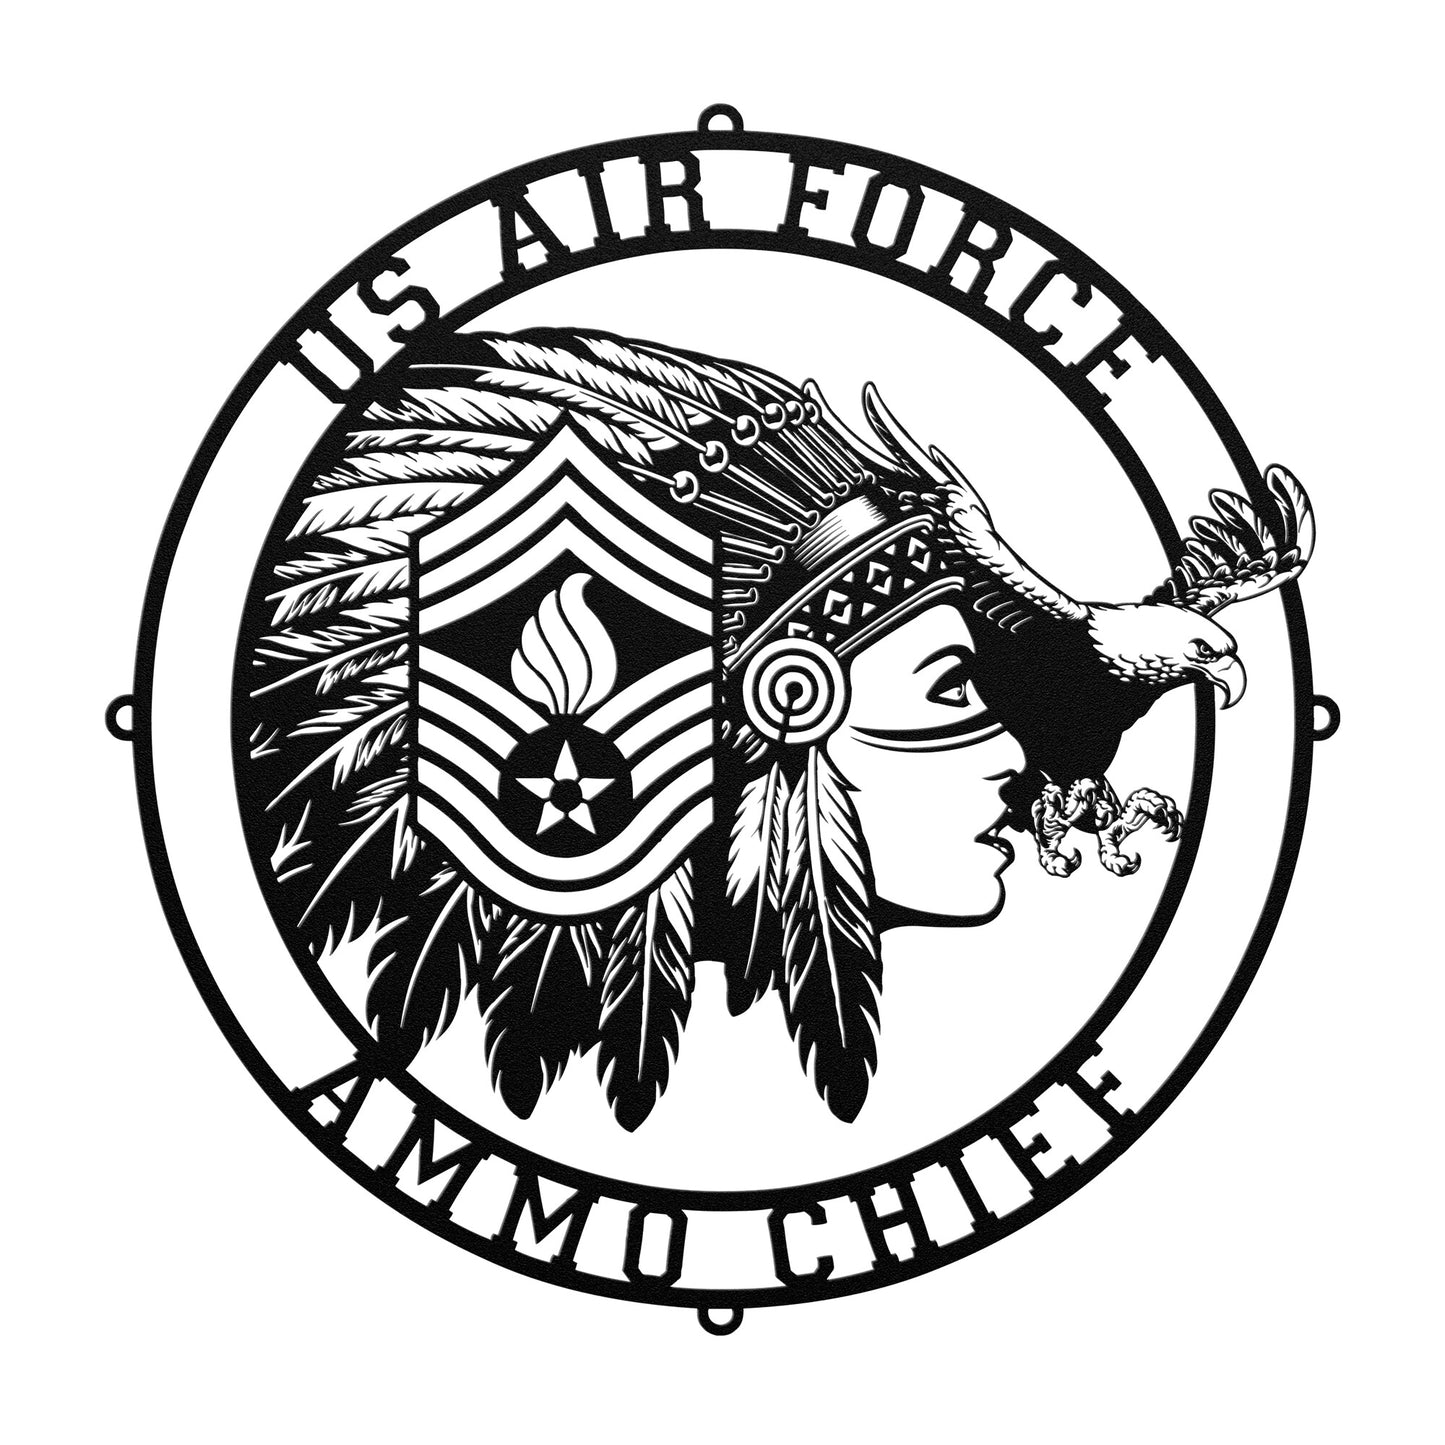 USAF AMMO Chief (Female Silhouette) Headdress Stripes Pisspot Eagle Die Cut Hanging Metal Wall Sign